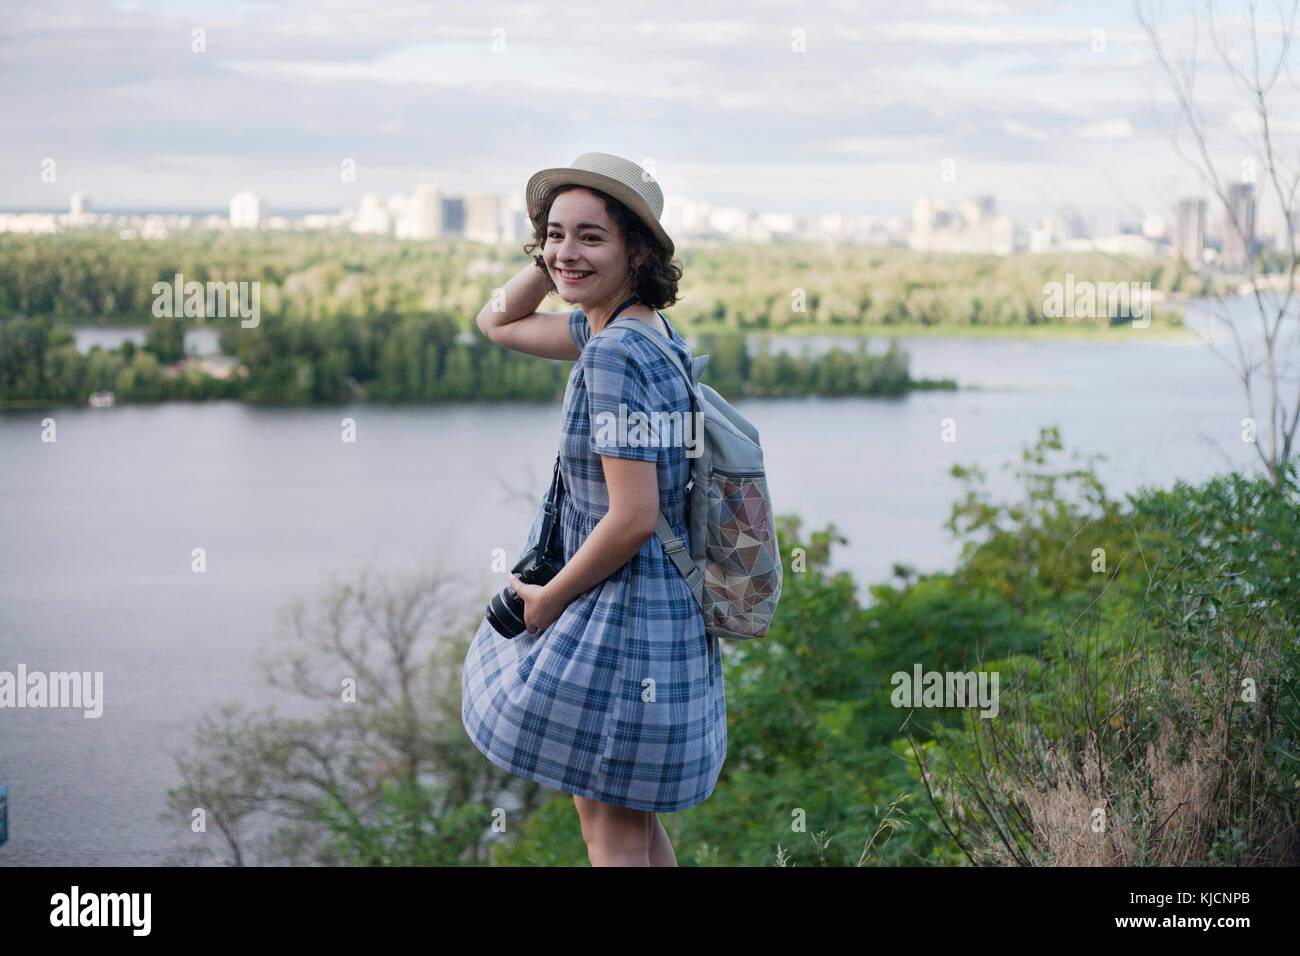 Portrait of a Caucasian woman carrying camera near river Stock Photo